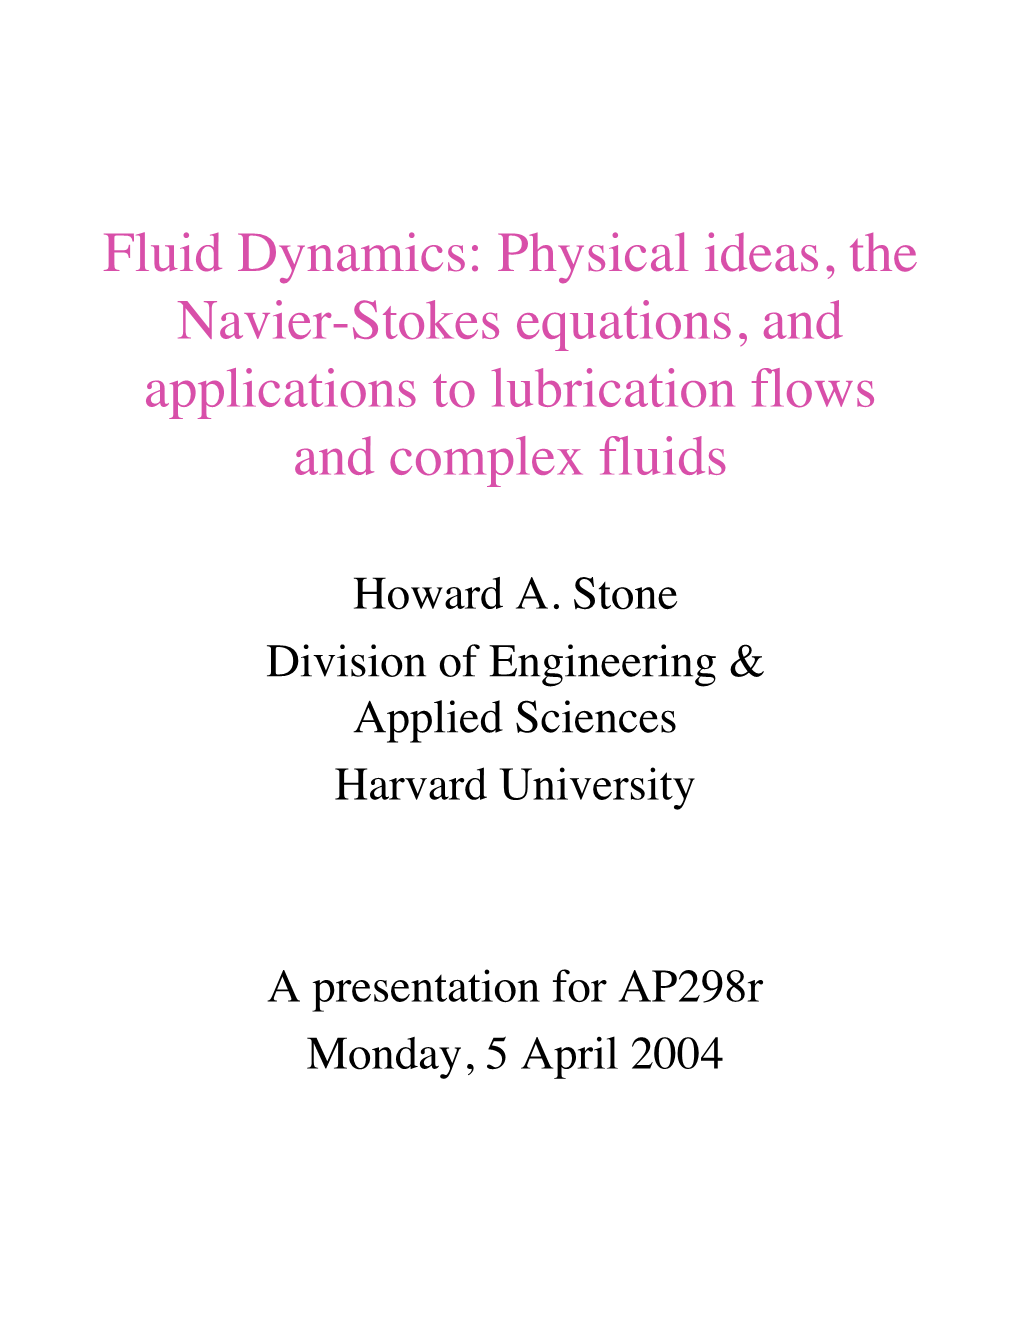 Fluid Dynamics: Physical Ideas, the Navier-Stokes Equations, and Applications to Lubrication Flows and Complex Fluids